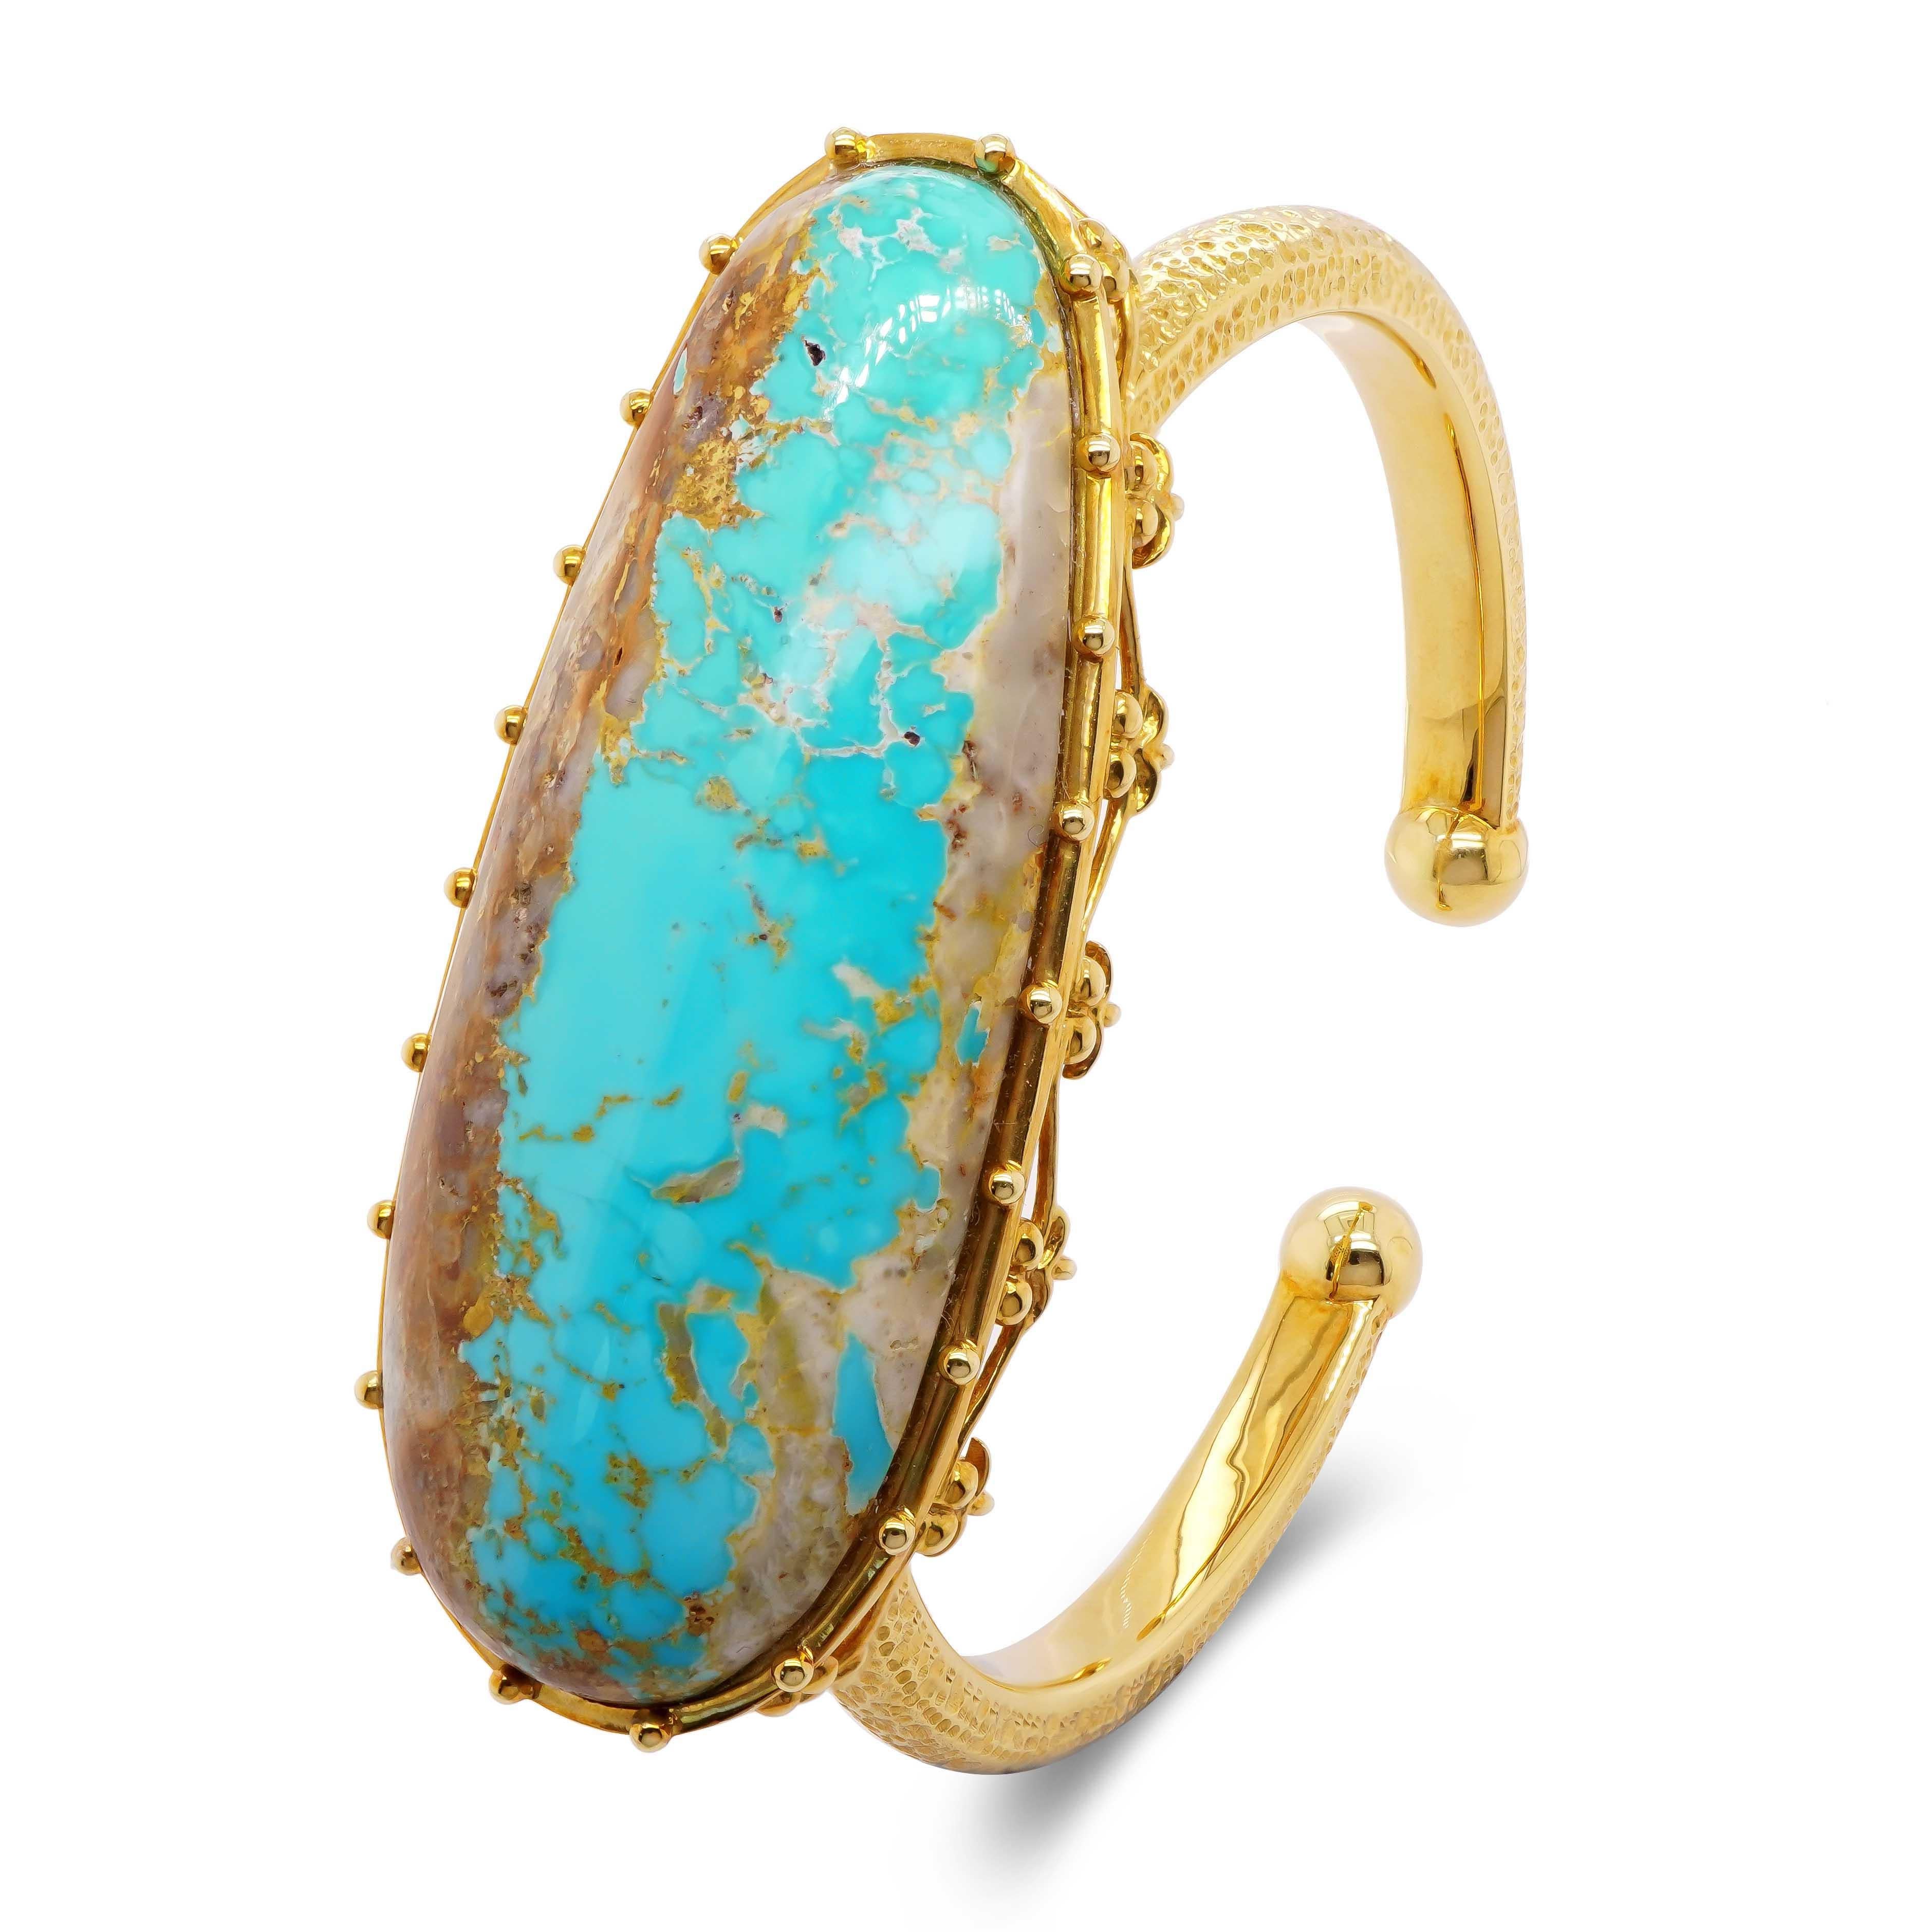 Aesthetic Movement 64.45 Carats Turquoise 18k Yellow Gold Mermaid Bangle For Sale